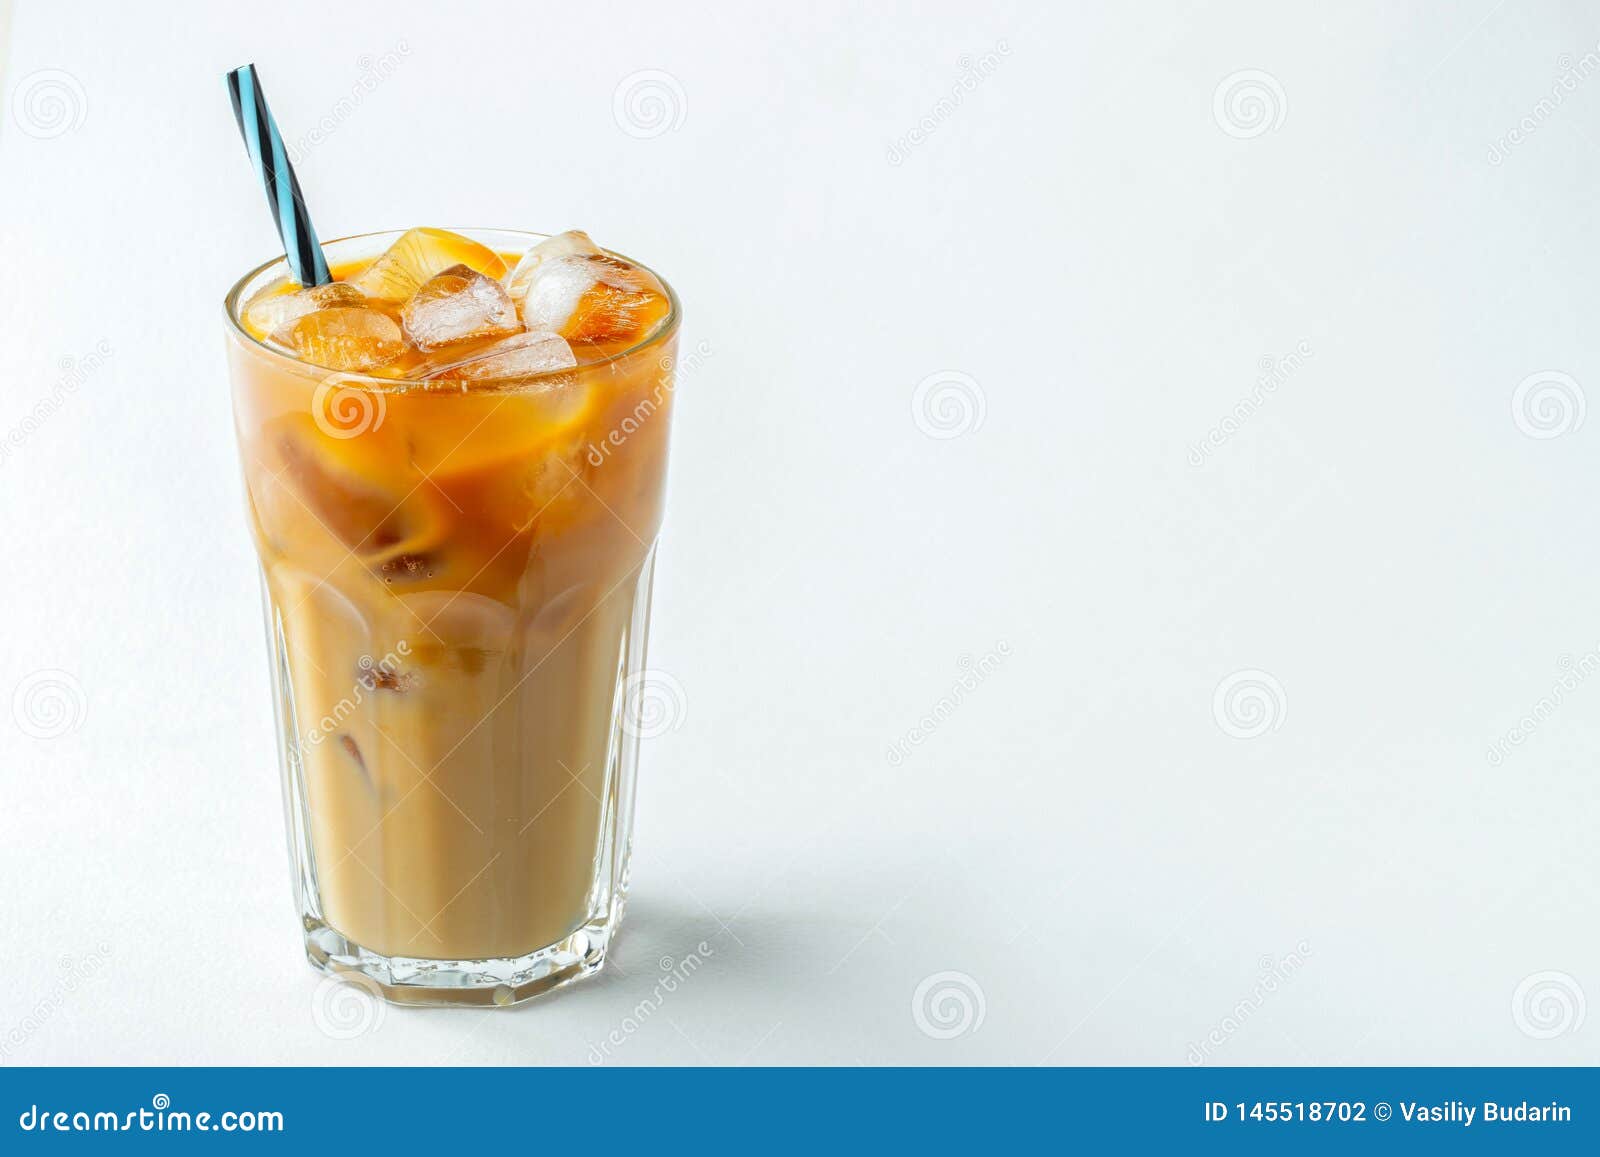 https://thumbs.dreamstime.com/z/ice-coffee-tall-glass-cream-poured-over-beans-cold-summer-drink-light-background-copy-space-145518702.jpg